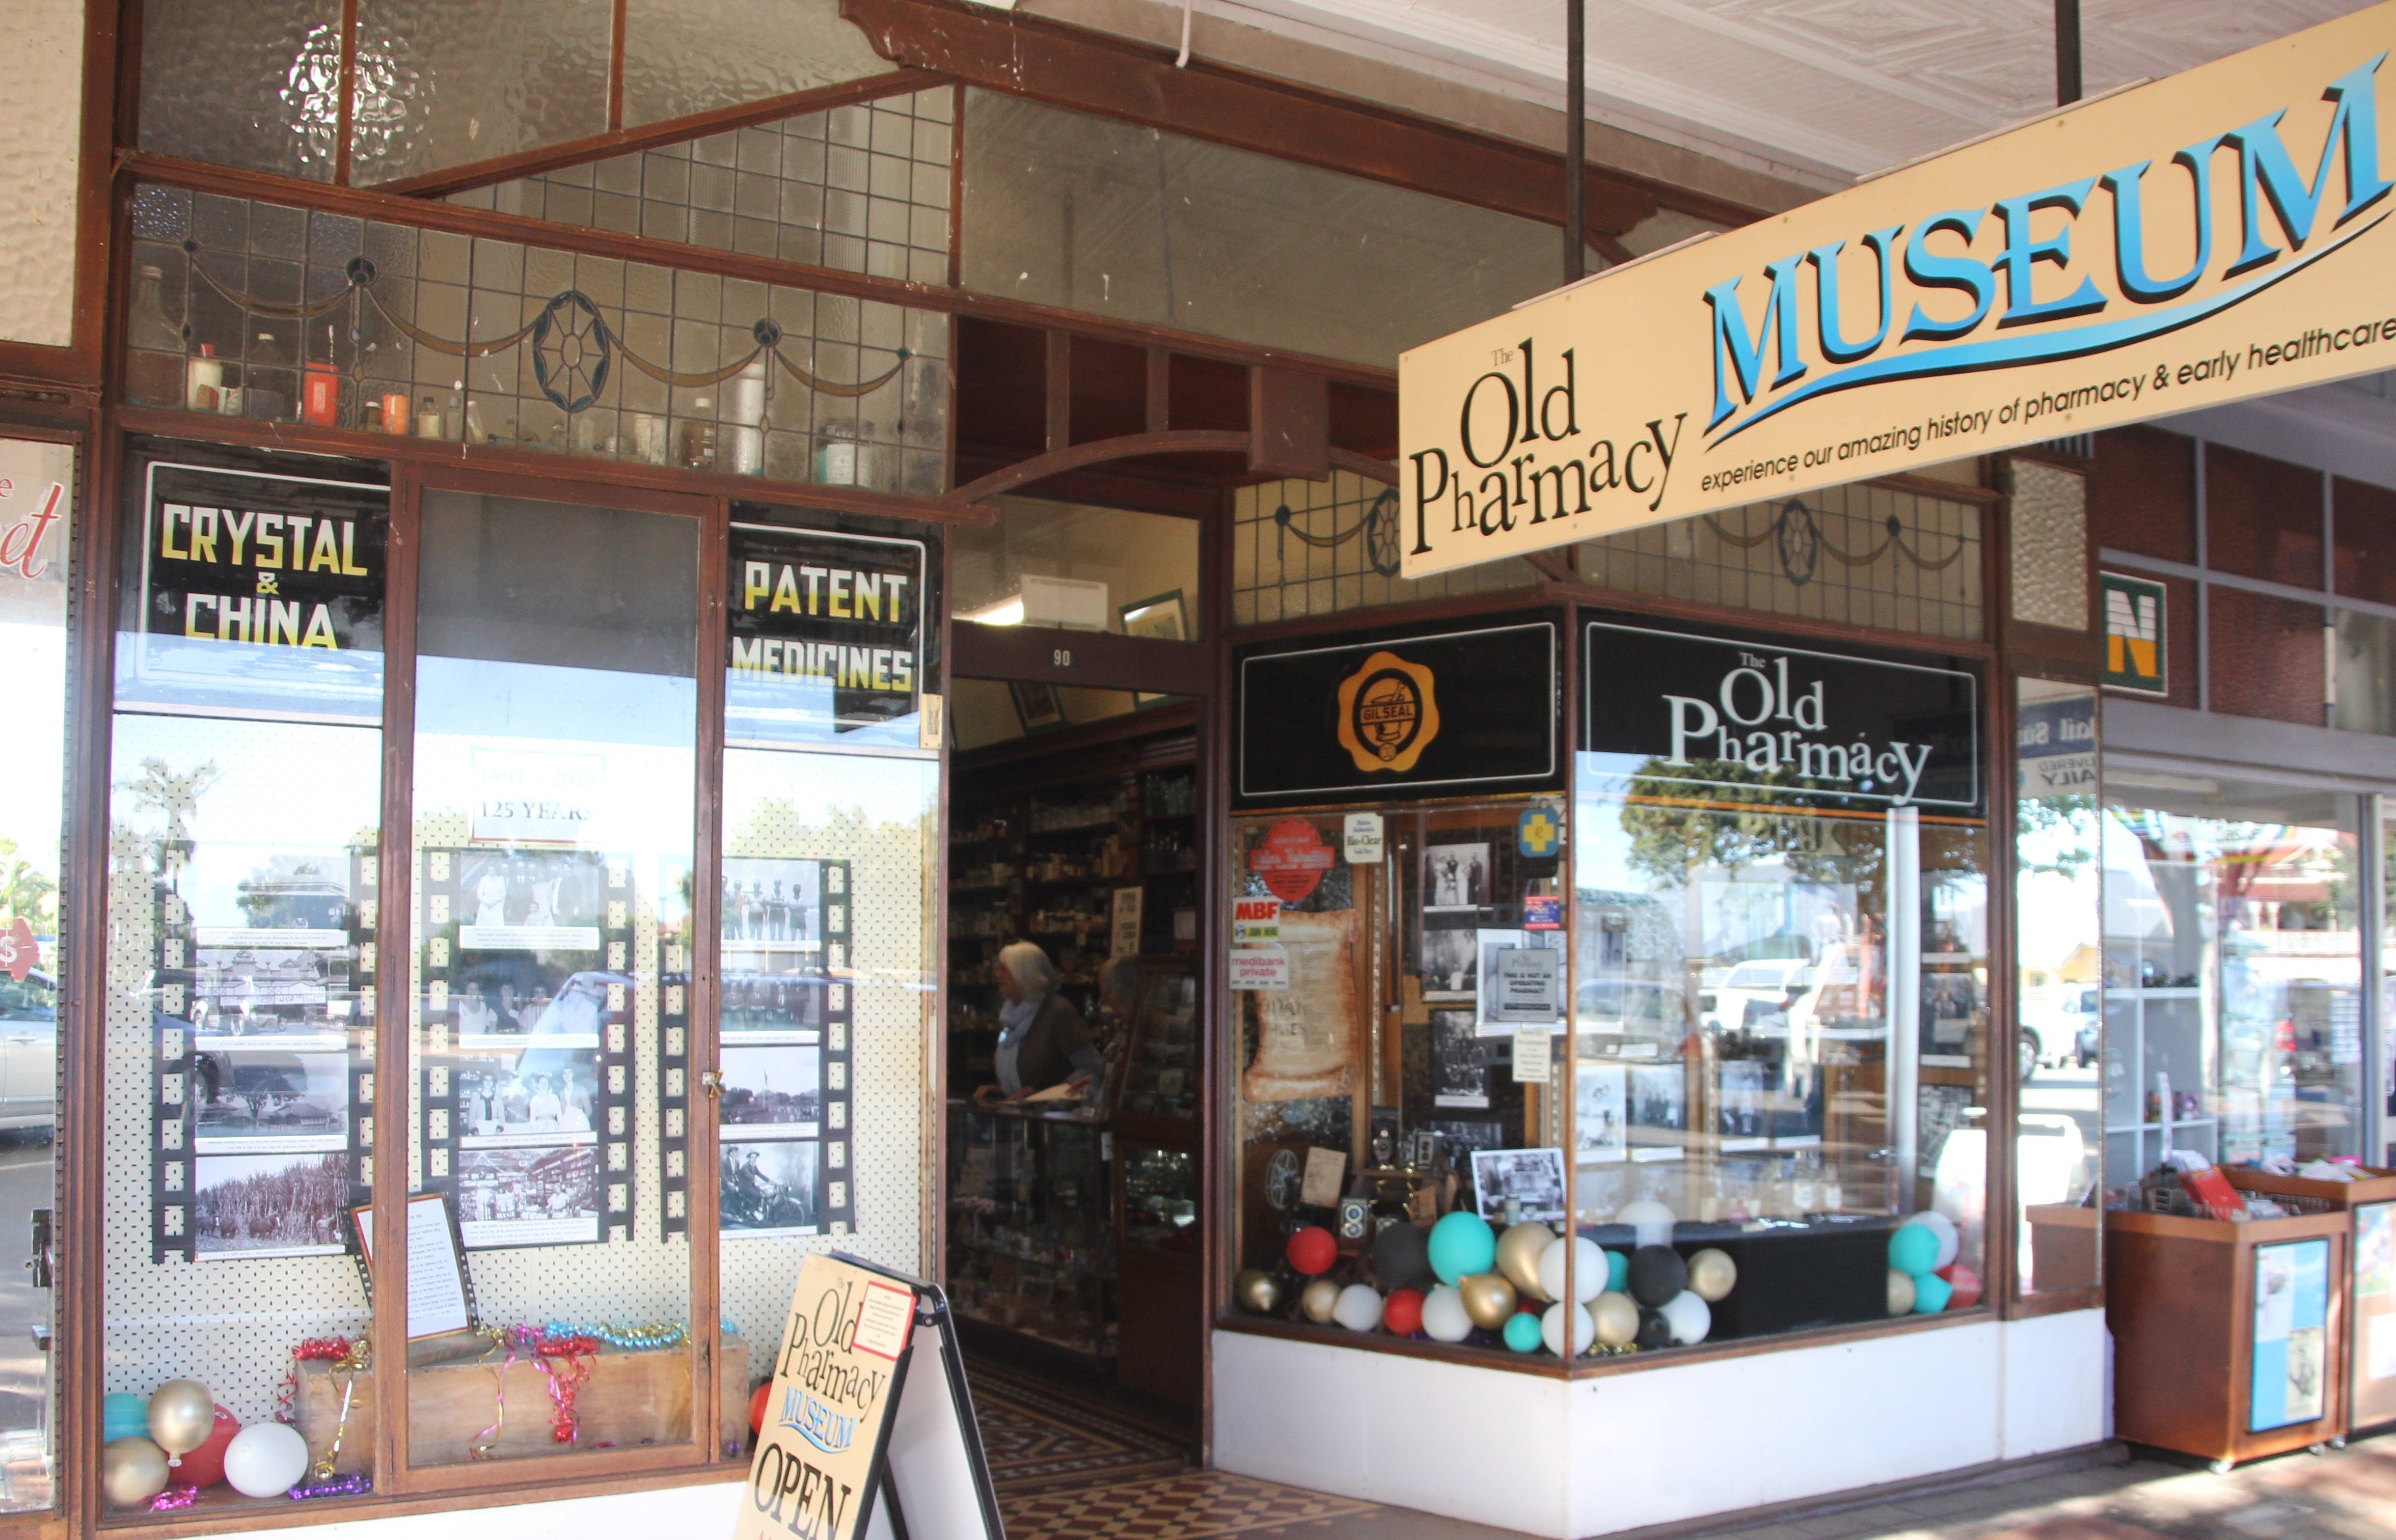 Old Pharmacy Museum  Childers - Accommodation Directory